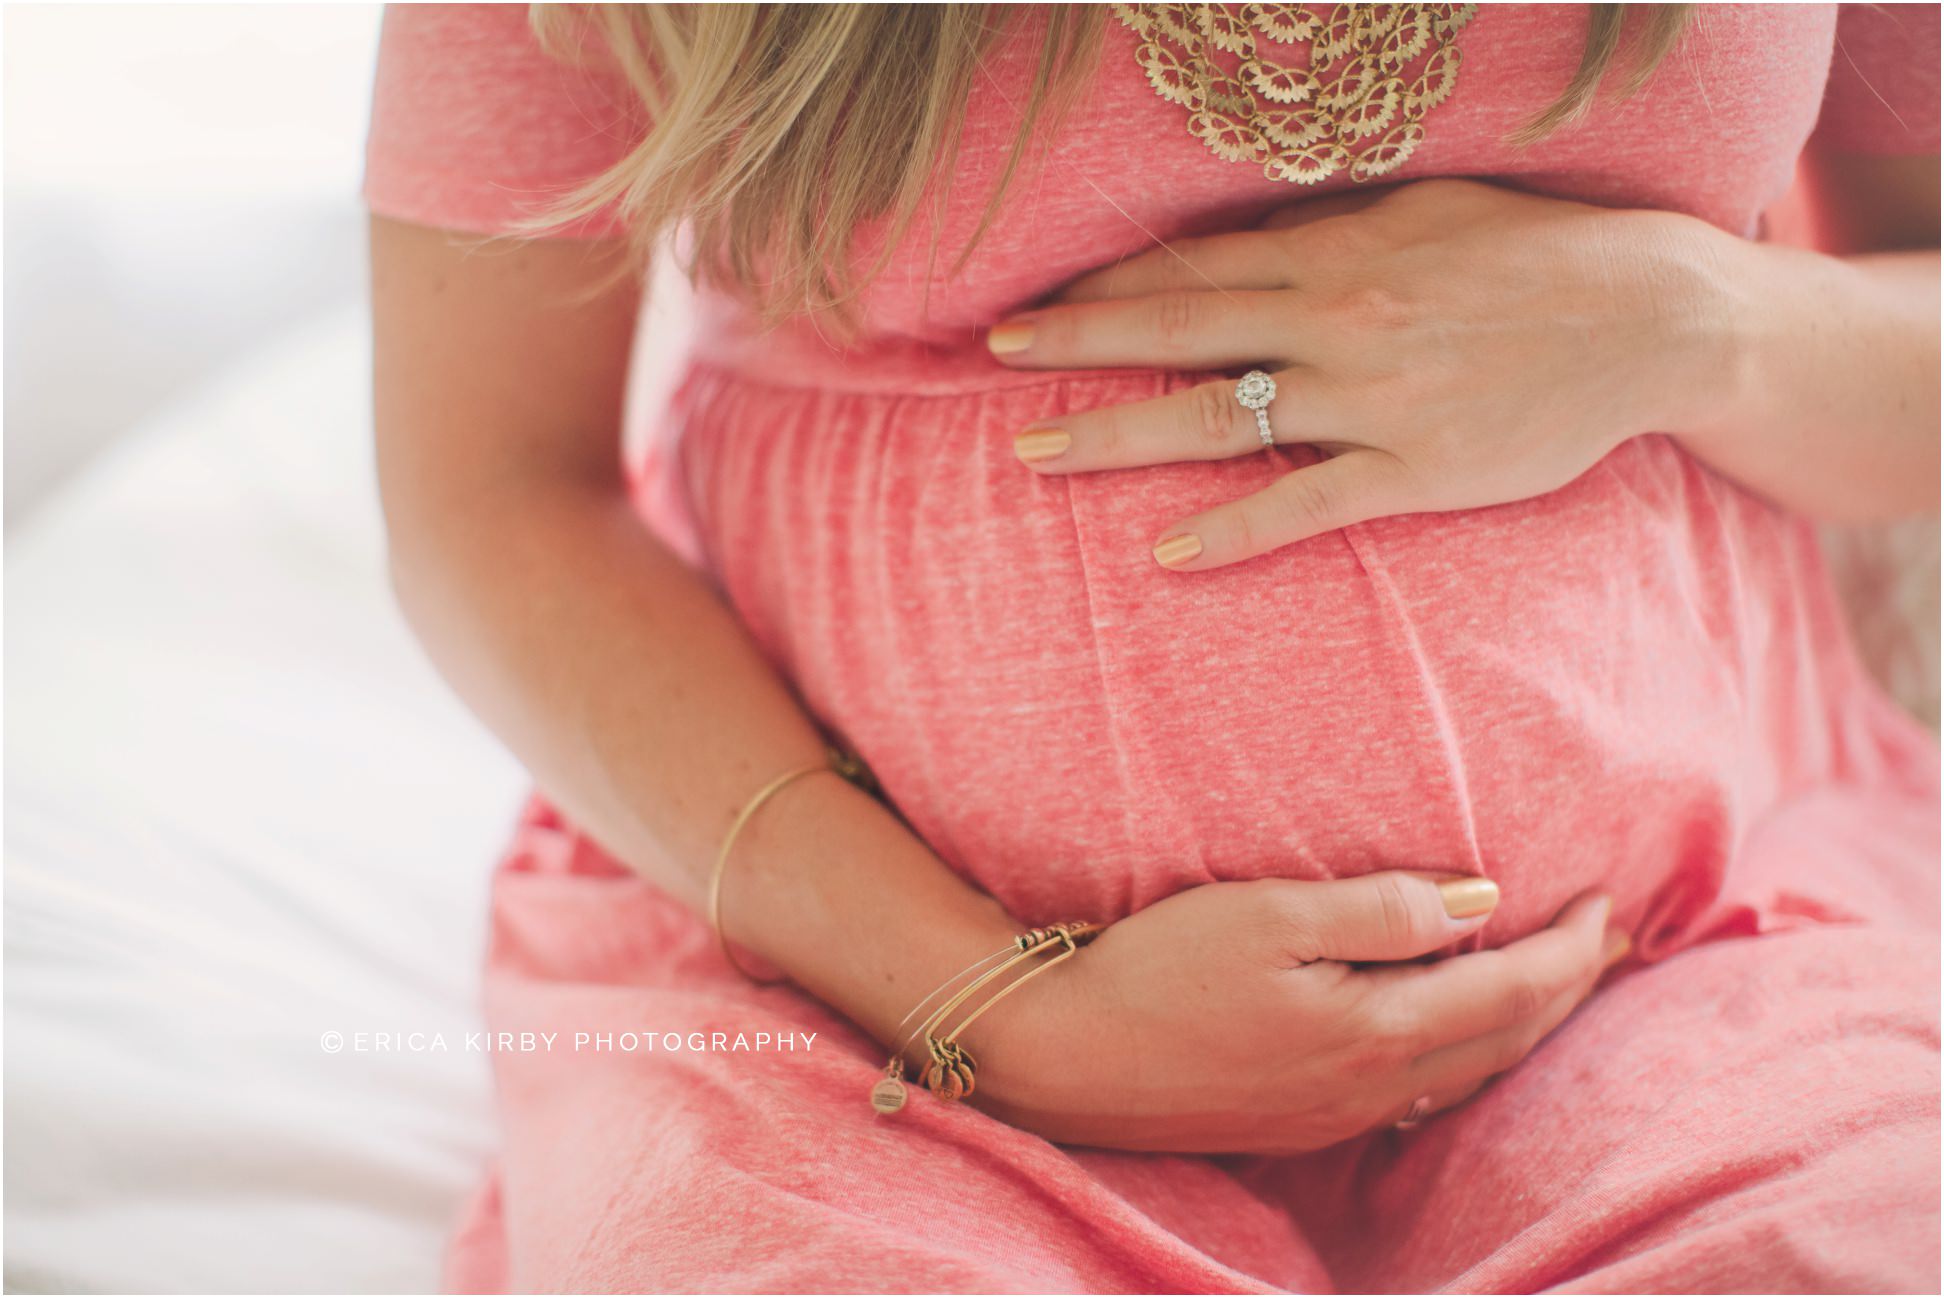 Northwest Arkansas Bentonville Maternity Photographer - in home mommy and me maternity session - lifestyle photography - erica kirby photography